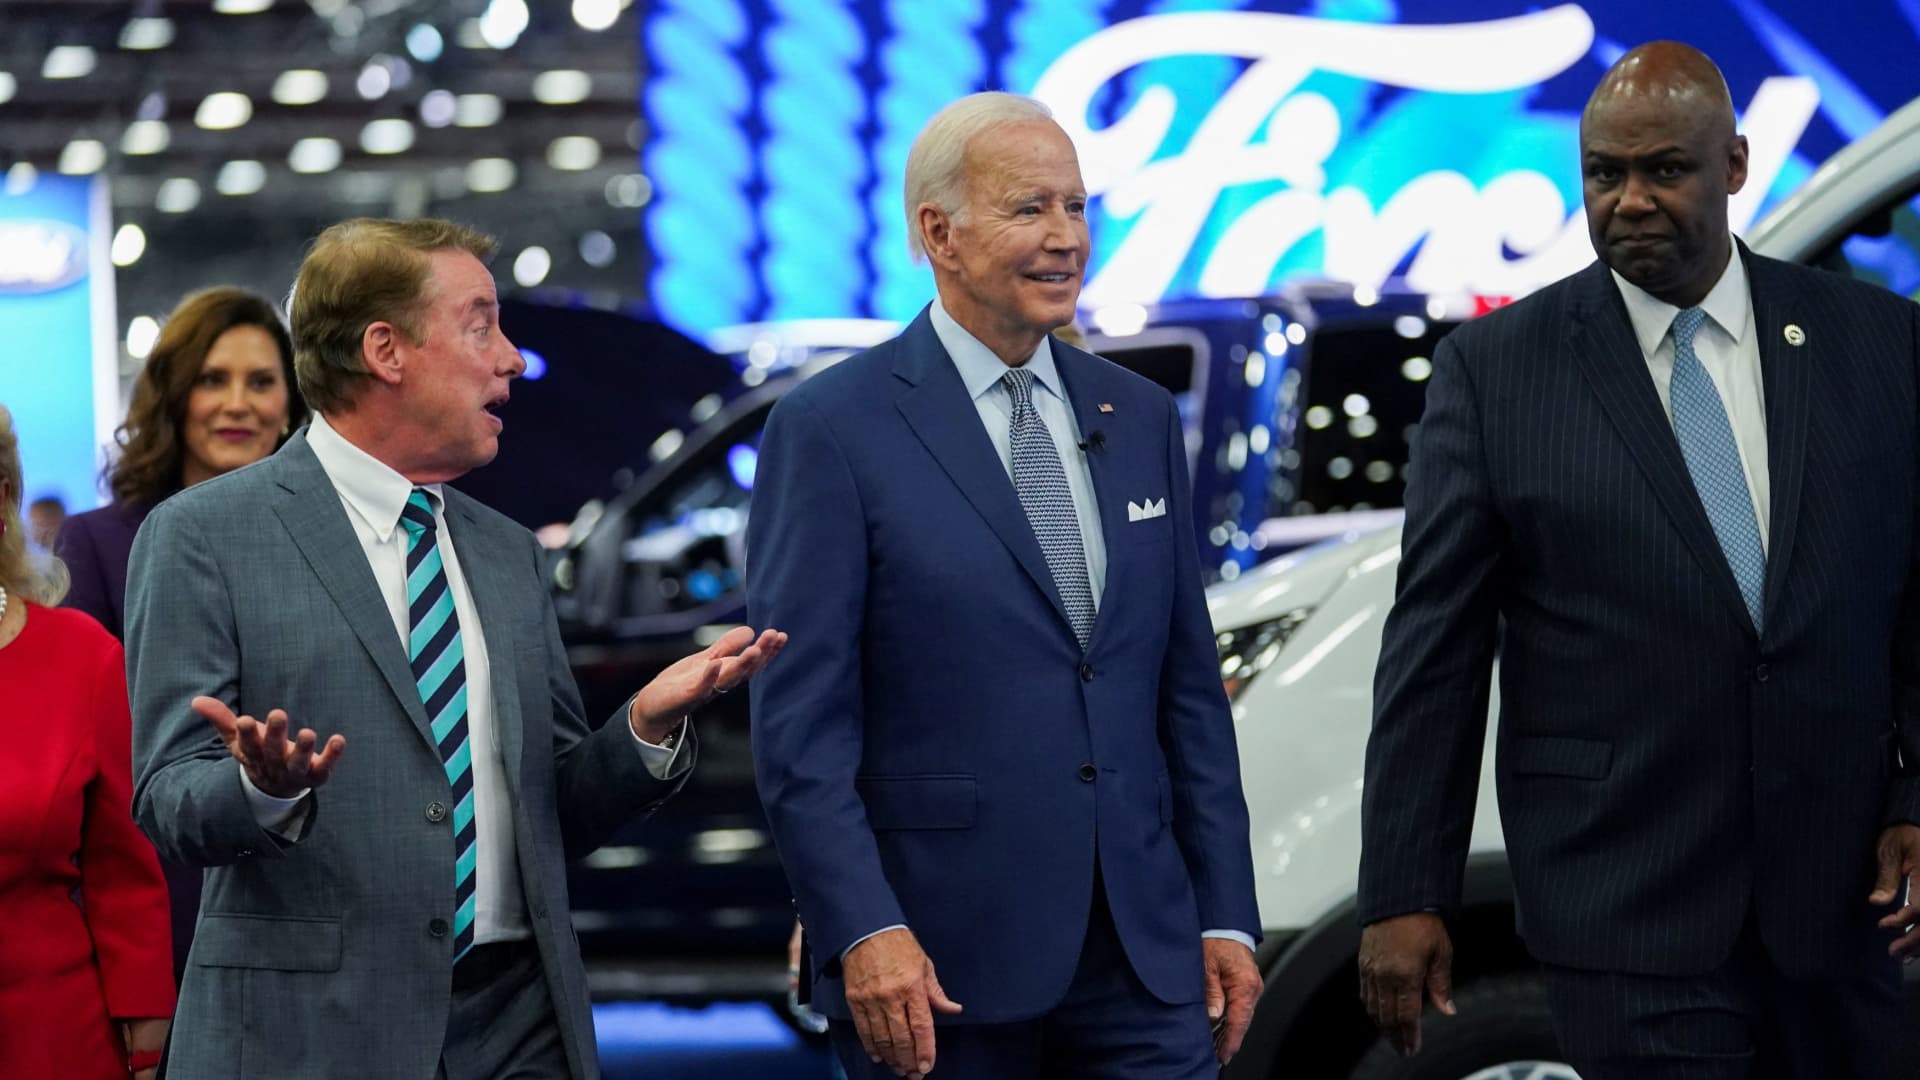 U.S. President Joe Biden walks with Ford Motor Company Executive Chair William Clay Ford Jr. and Ray Curry, President of the United Autoworkers, during a visit to the Detroit Auto Show, to highlight electric vehicle manufacturing in America, in Detroit, Michigan, September 14, 2022.